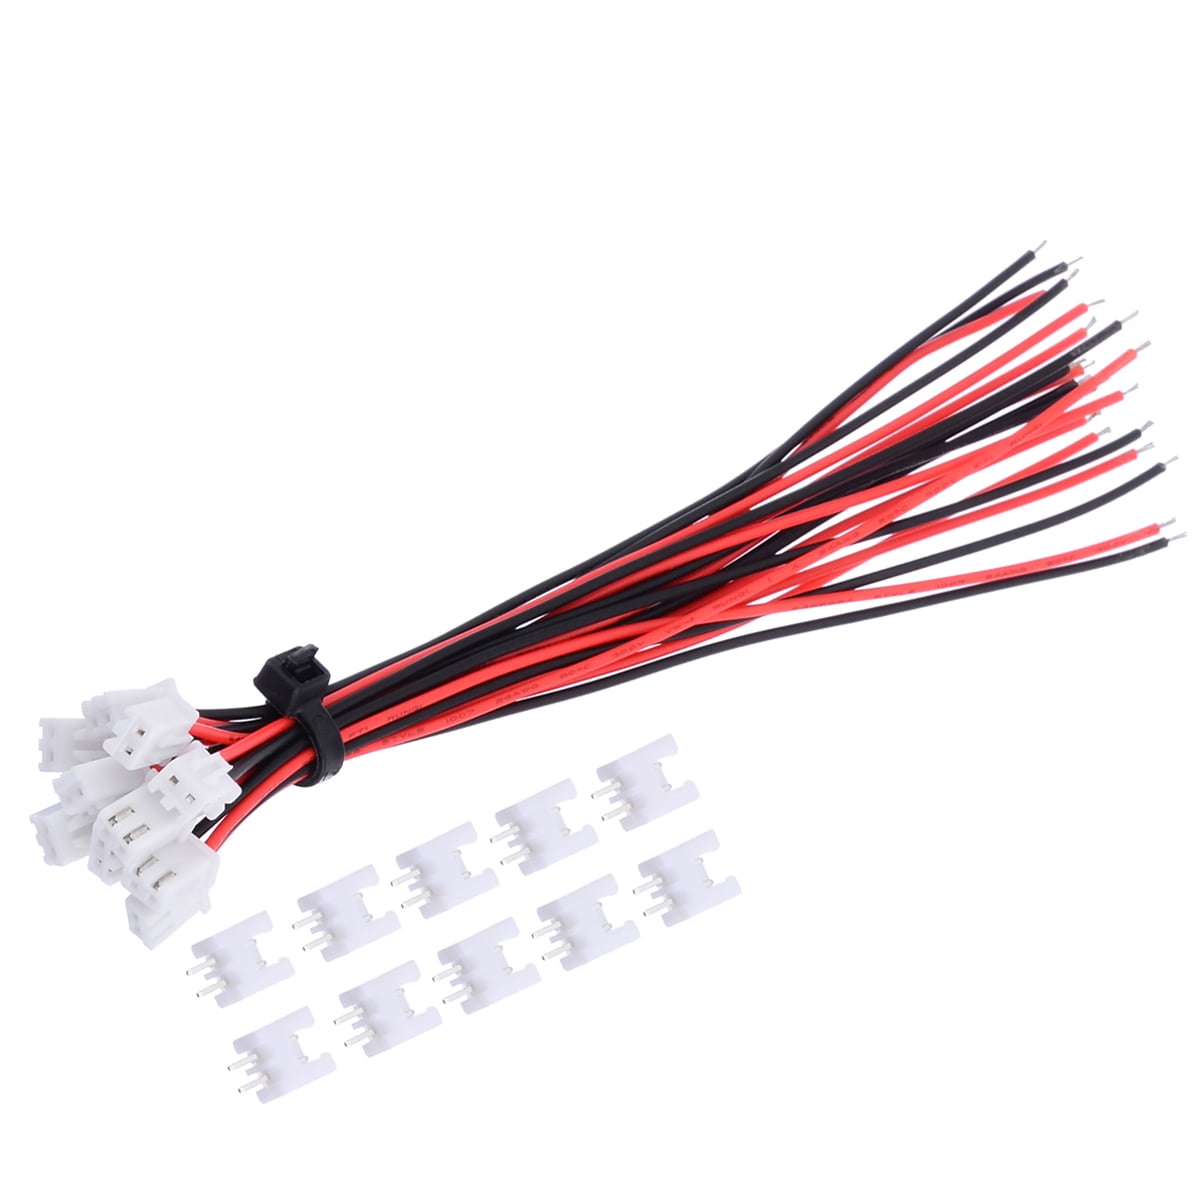 Yoton Accessories 1000pairs/lot lipobattery Plug 150mm JST Connector Wires Male/Female for RC Battery